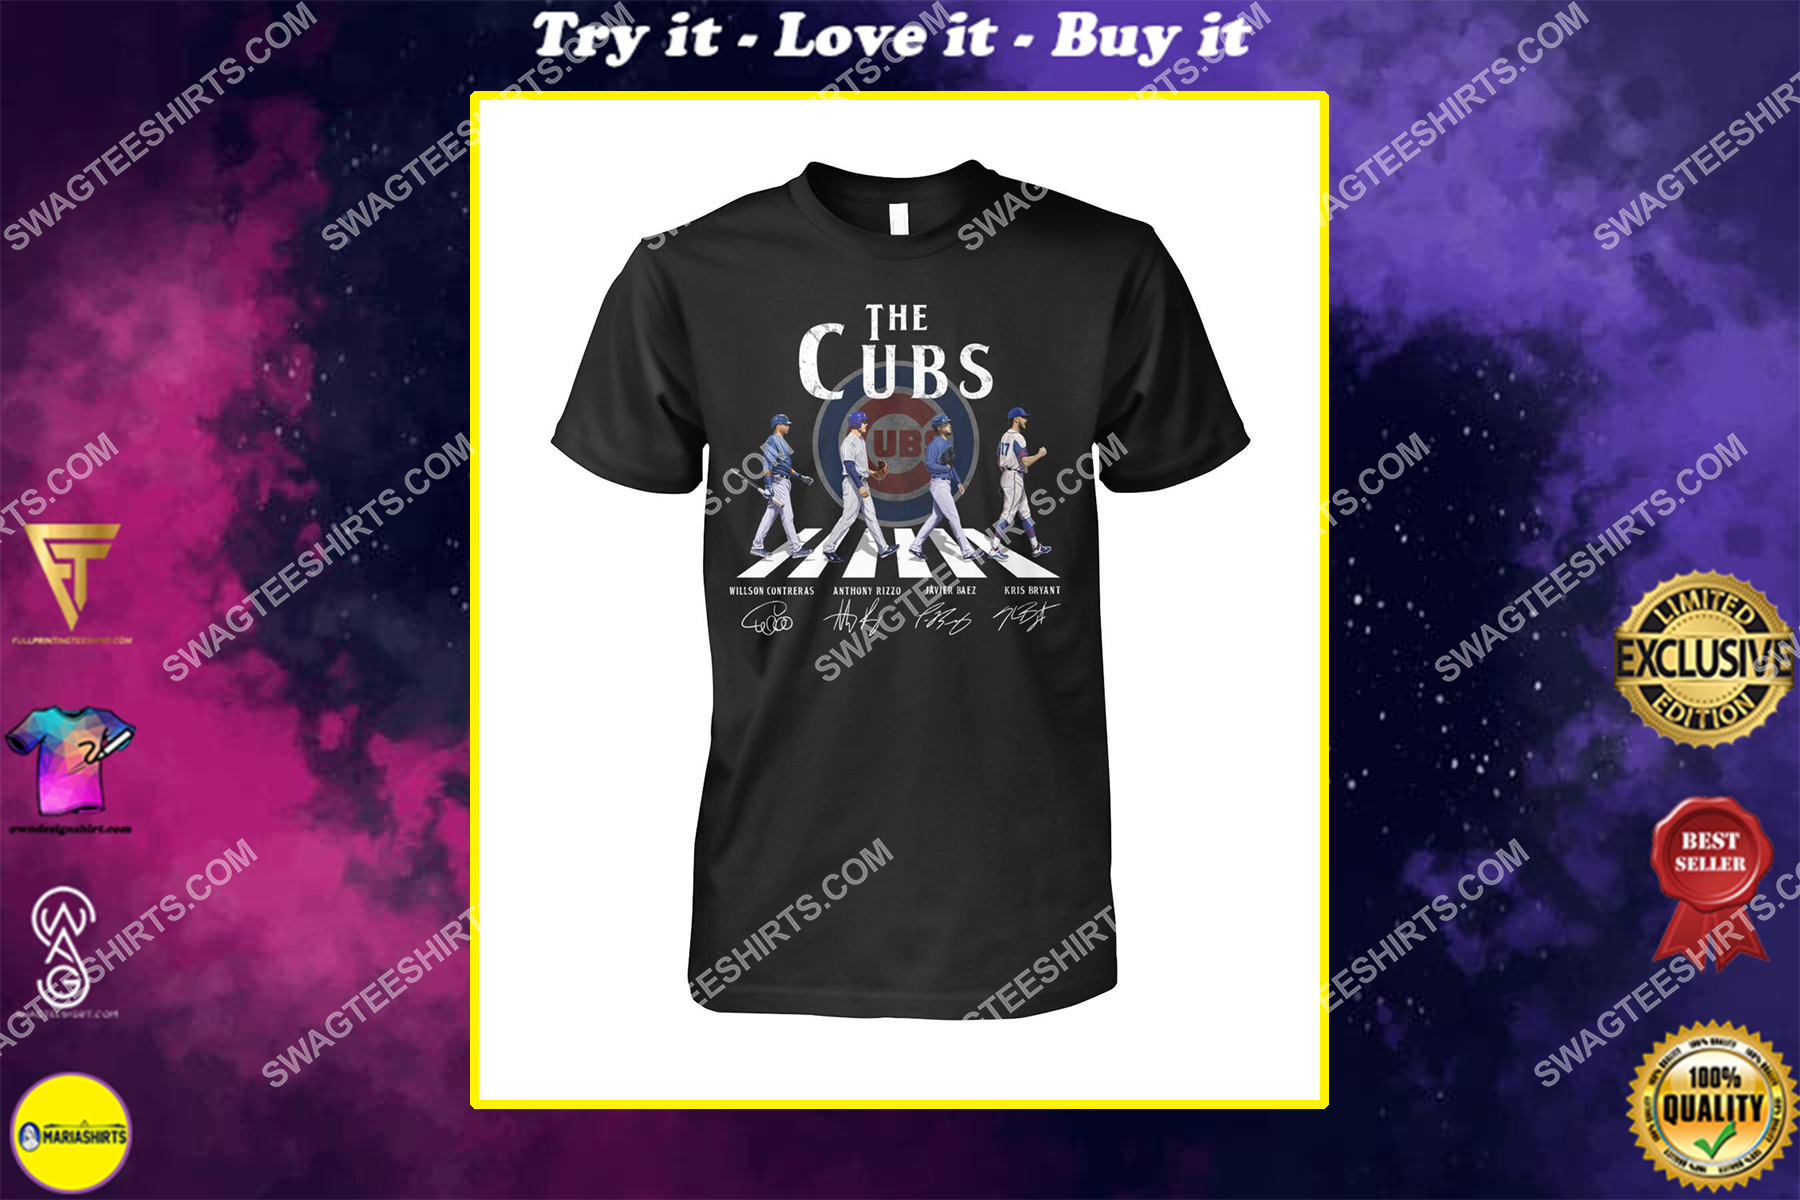 the chicago cubs signatures walking abbey road shirt